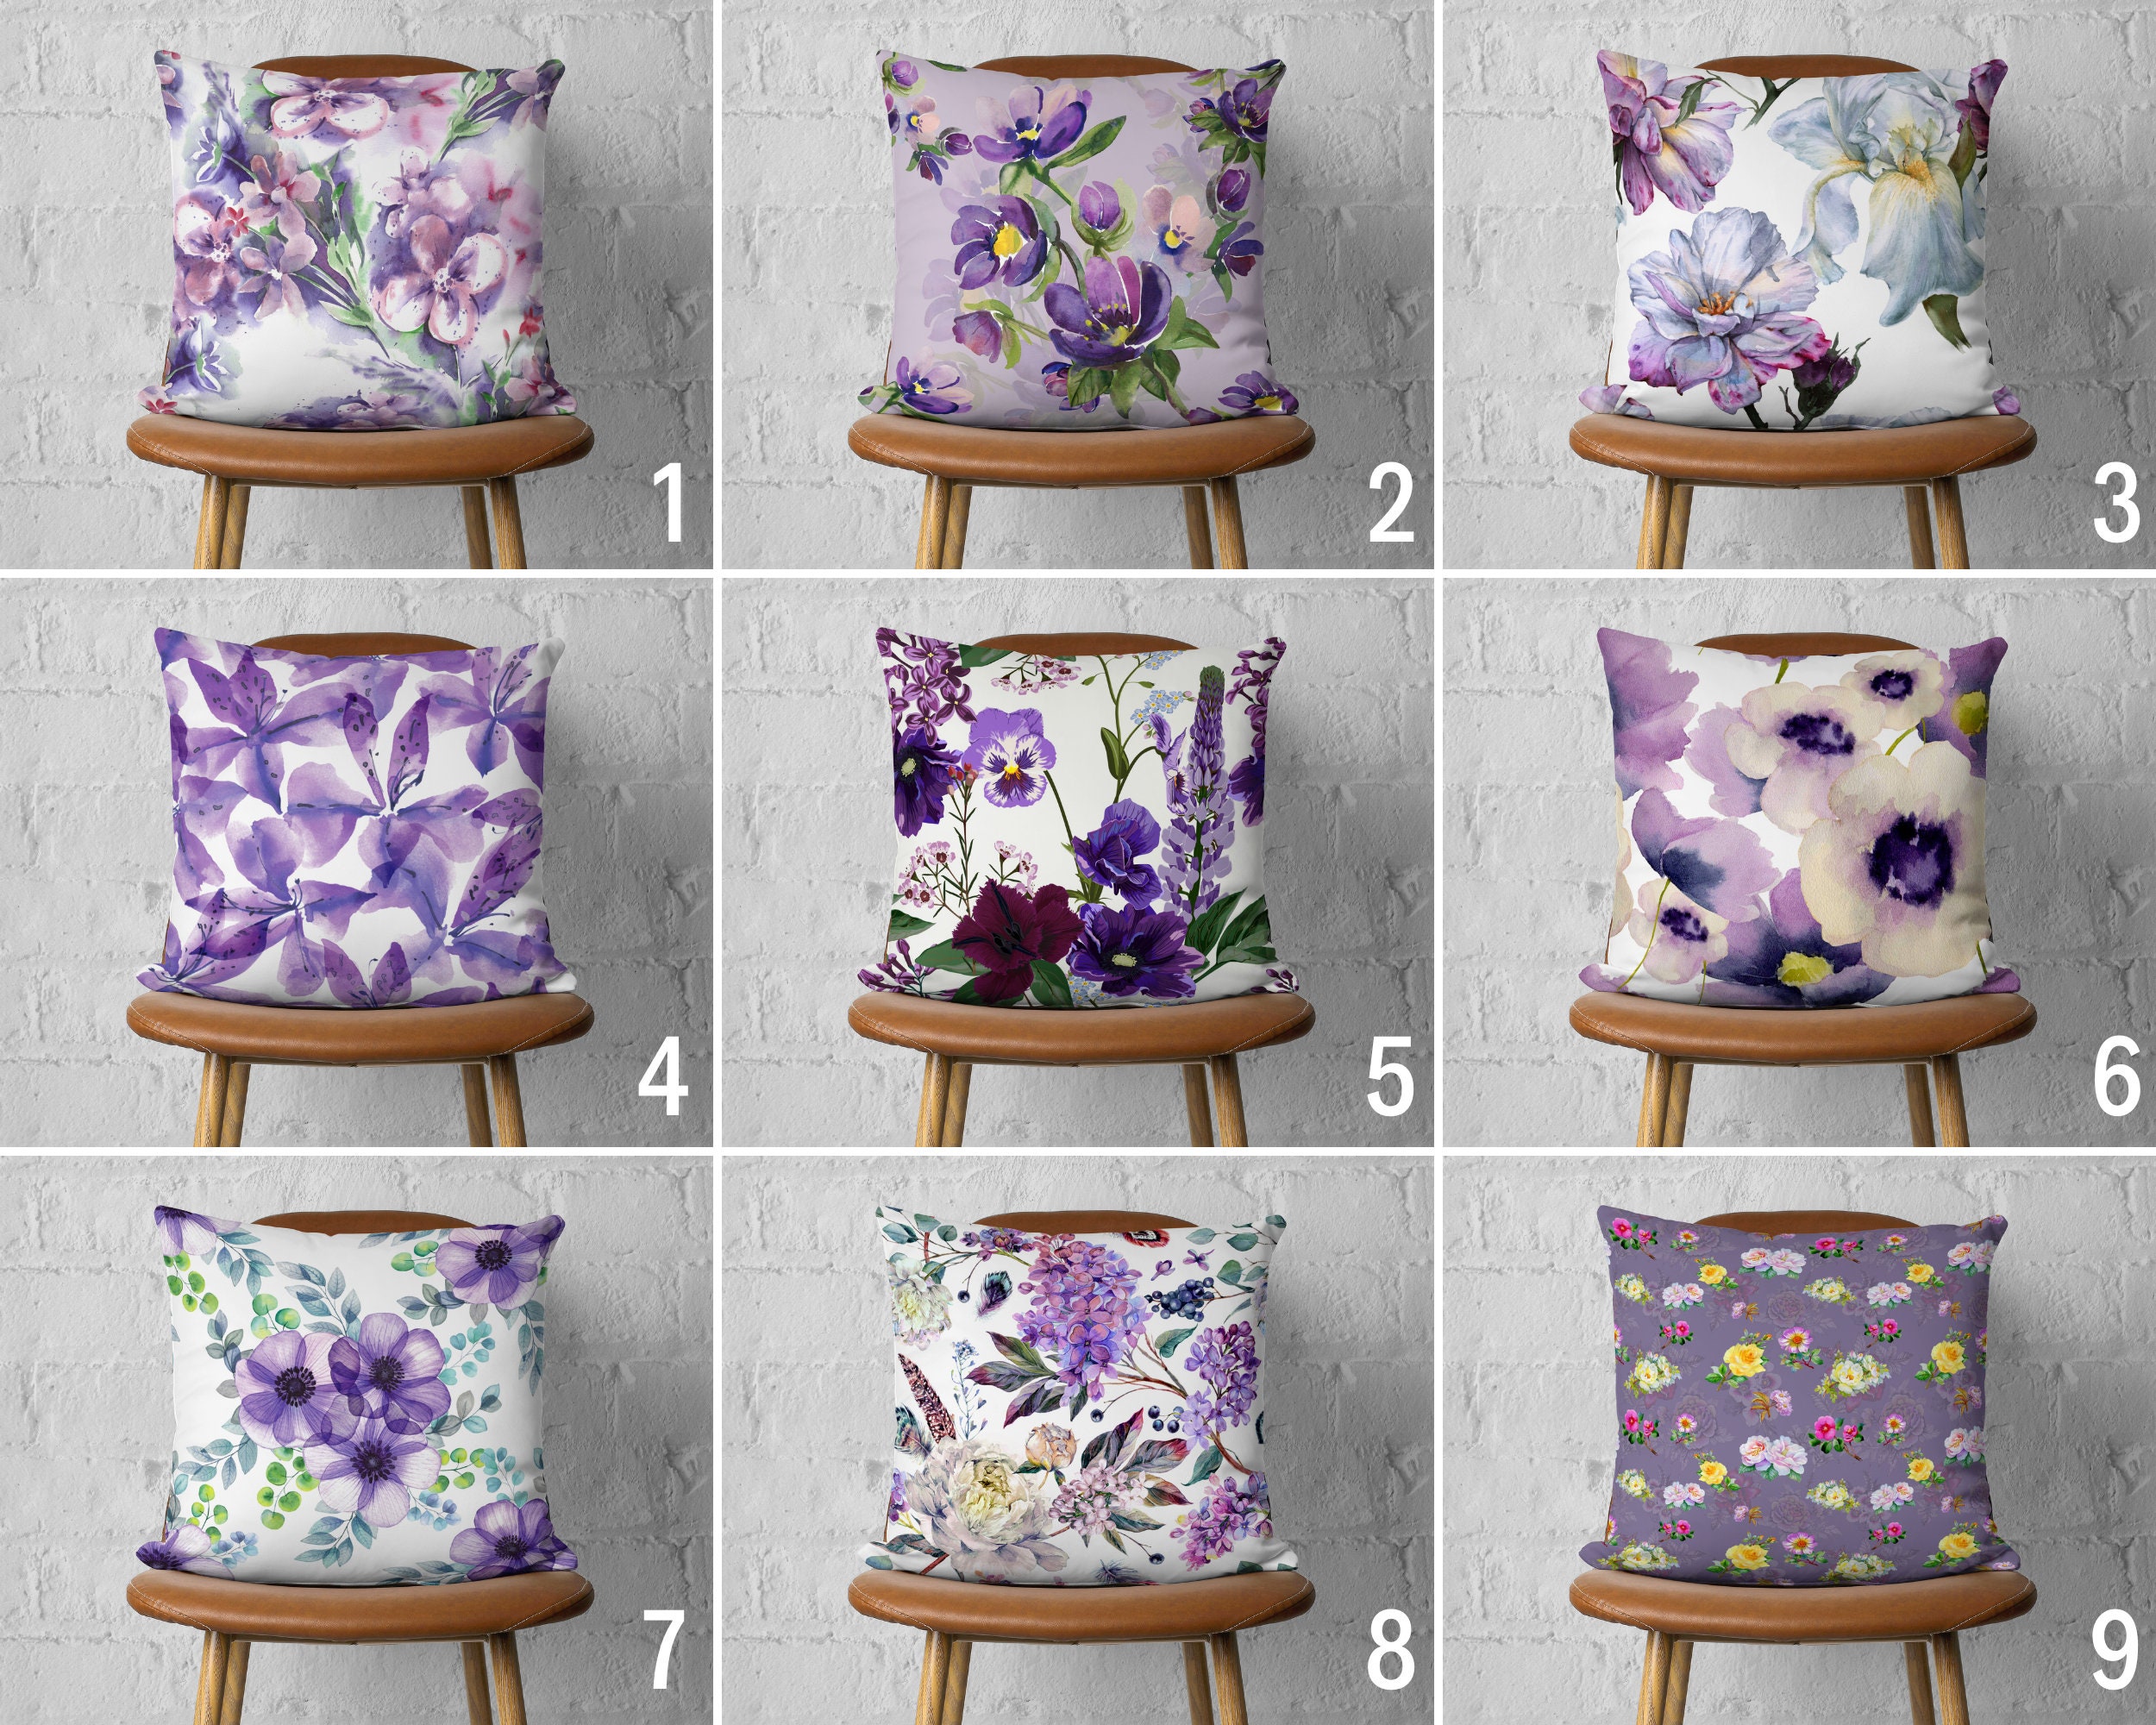  Awowee Throw Pillow Cover Paradise Garden Silk Scarf Pattern  Flowers Willow Leaves 20x20 Inches Pillowcase Home Decorative Square Pillow  Case Cushion Cover : Home & Kitchen